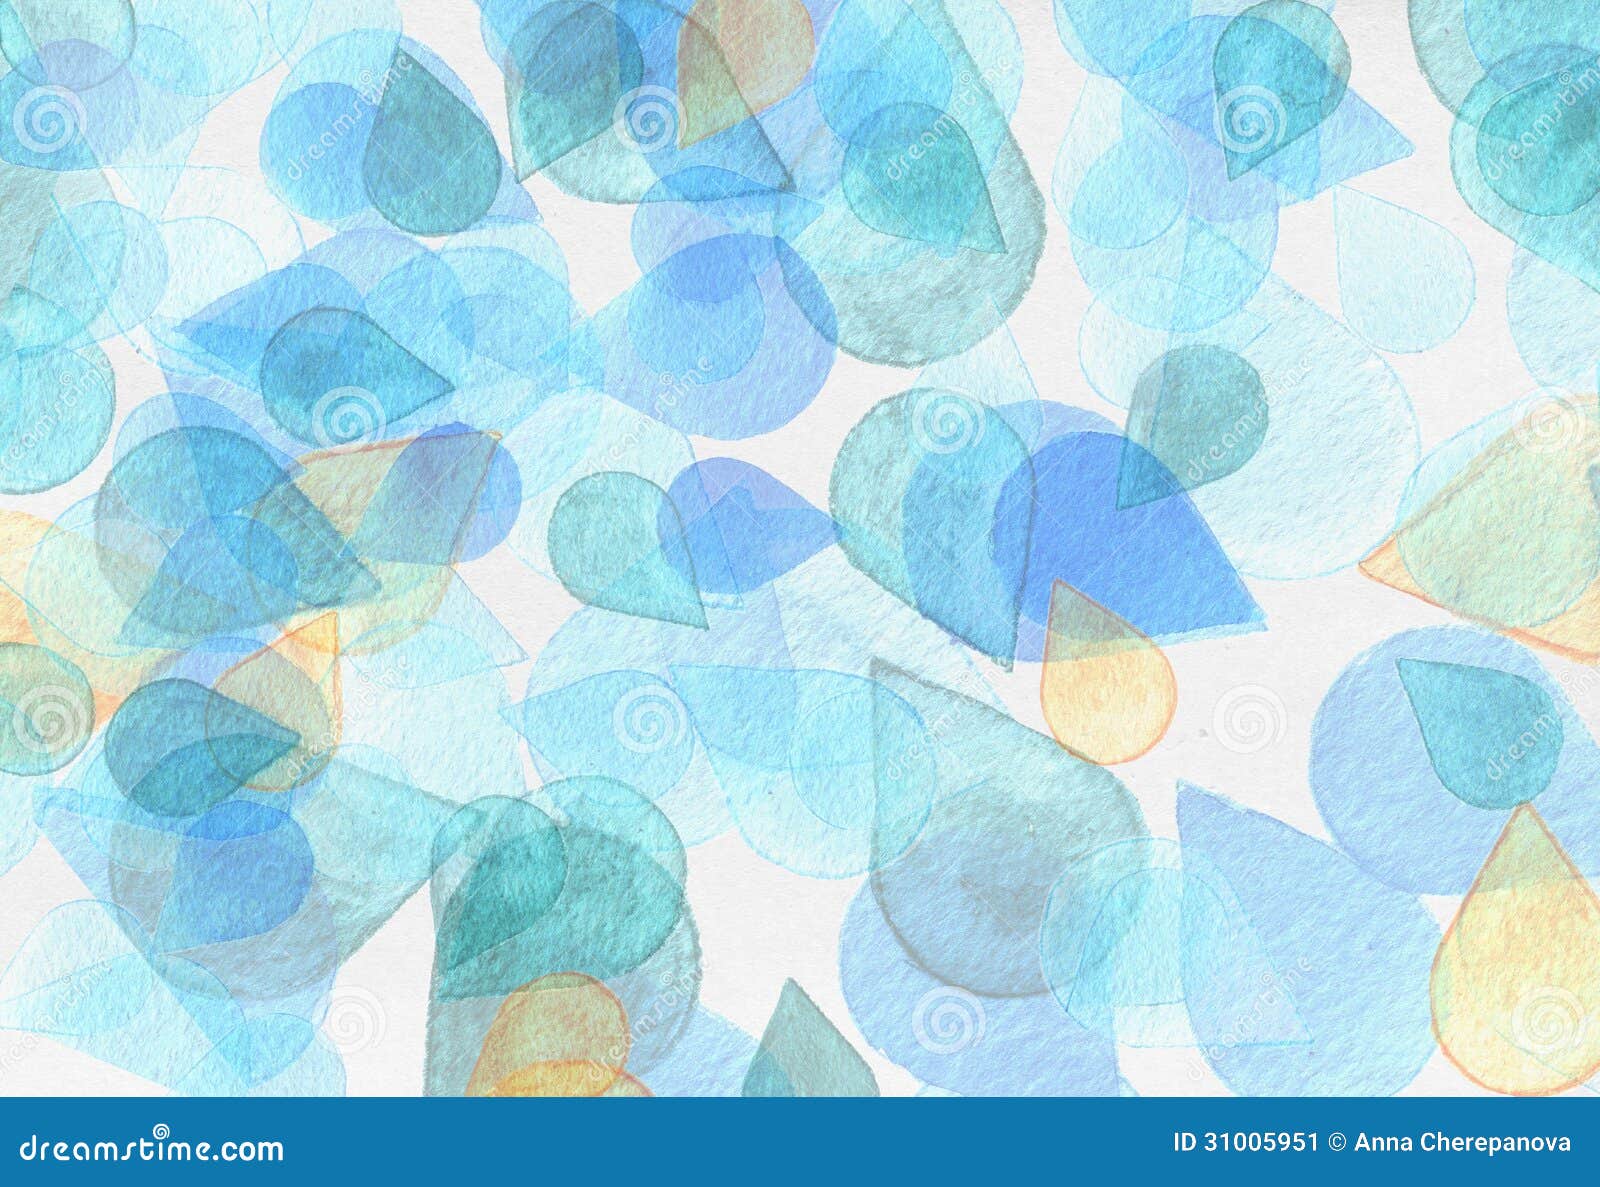 Watercolor background with drops pattern in light shades.